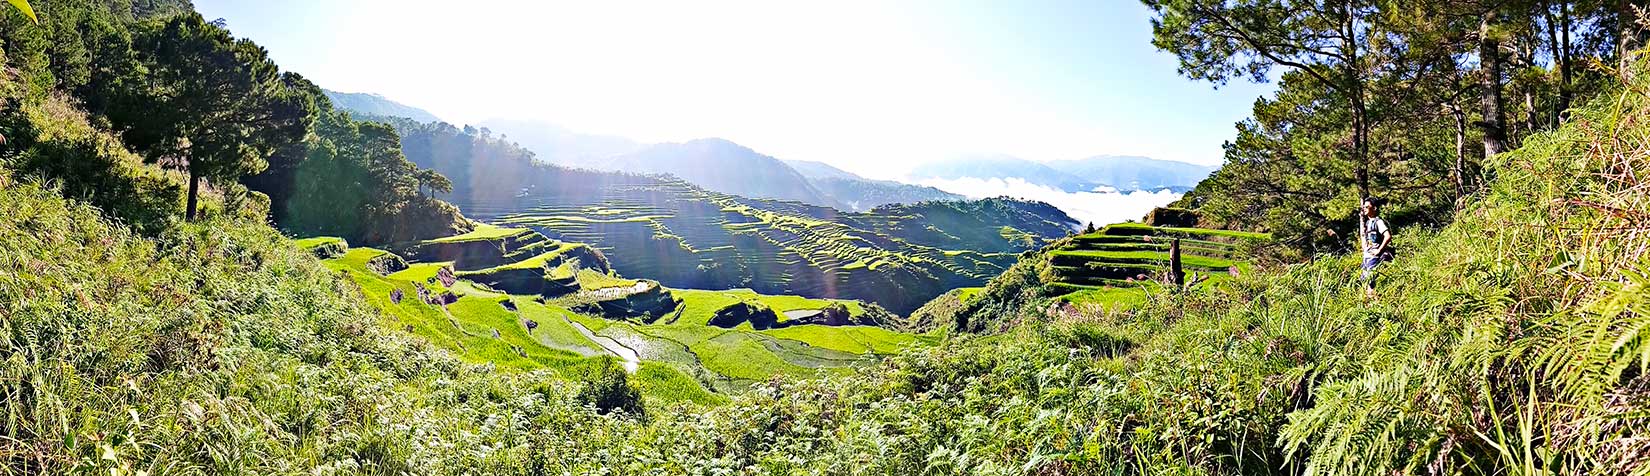 Maligcong rice terraces in Bontoc.